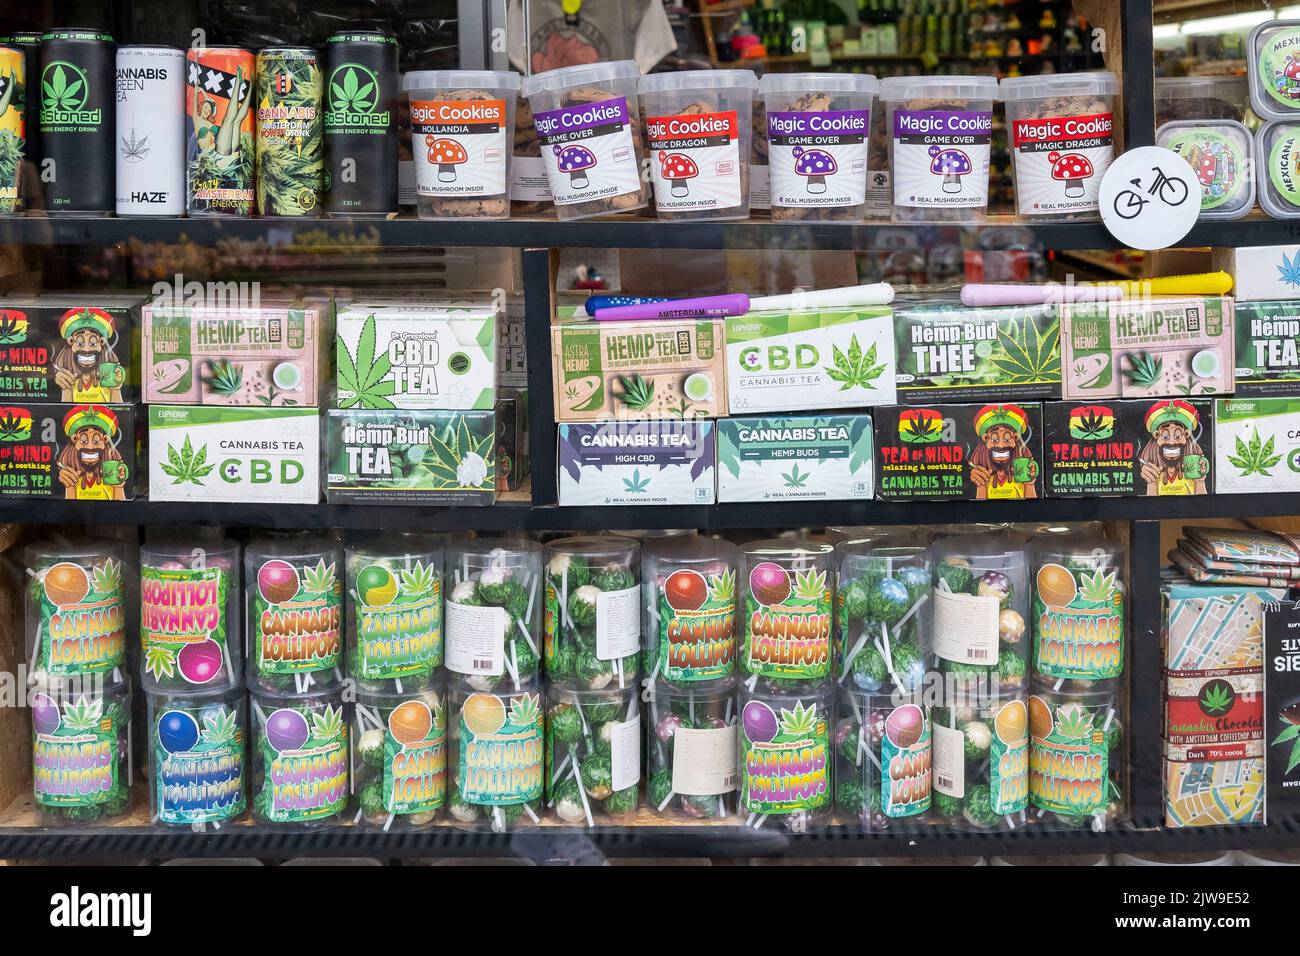 A collection of cannabis paraphernalia in the window of a shop in Amsterdam, Holland. Stock Photo